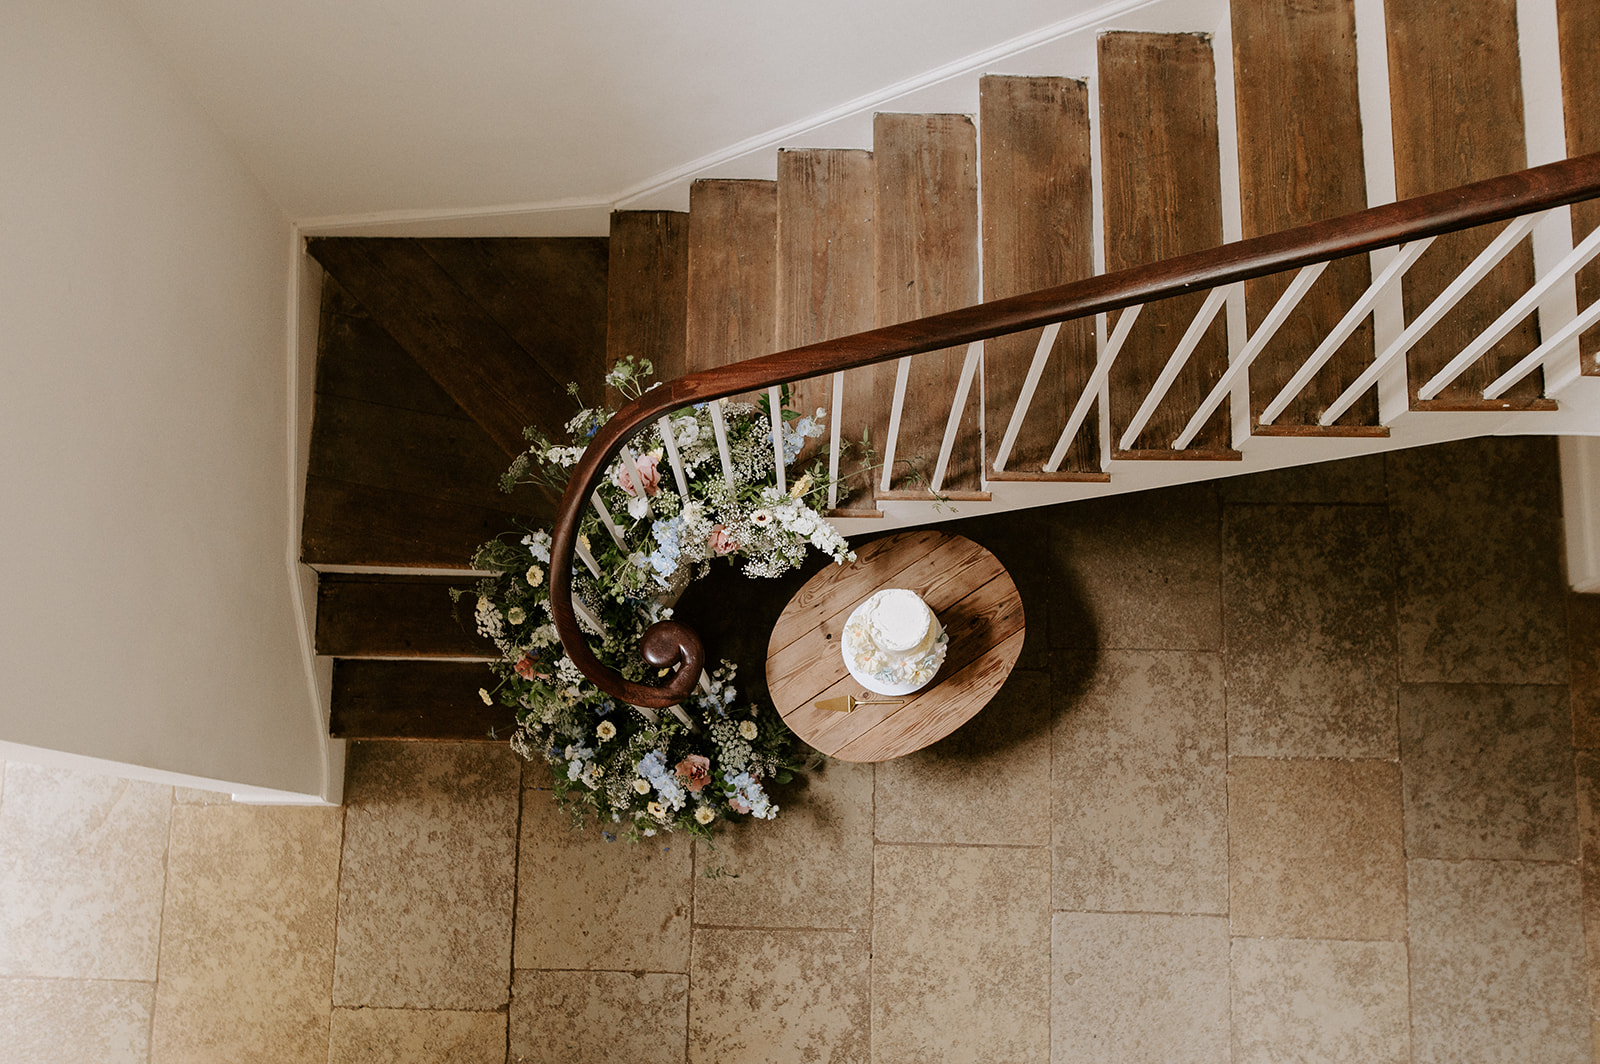 aswarby rectory staircase with spring florals